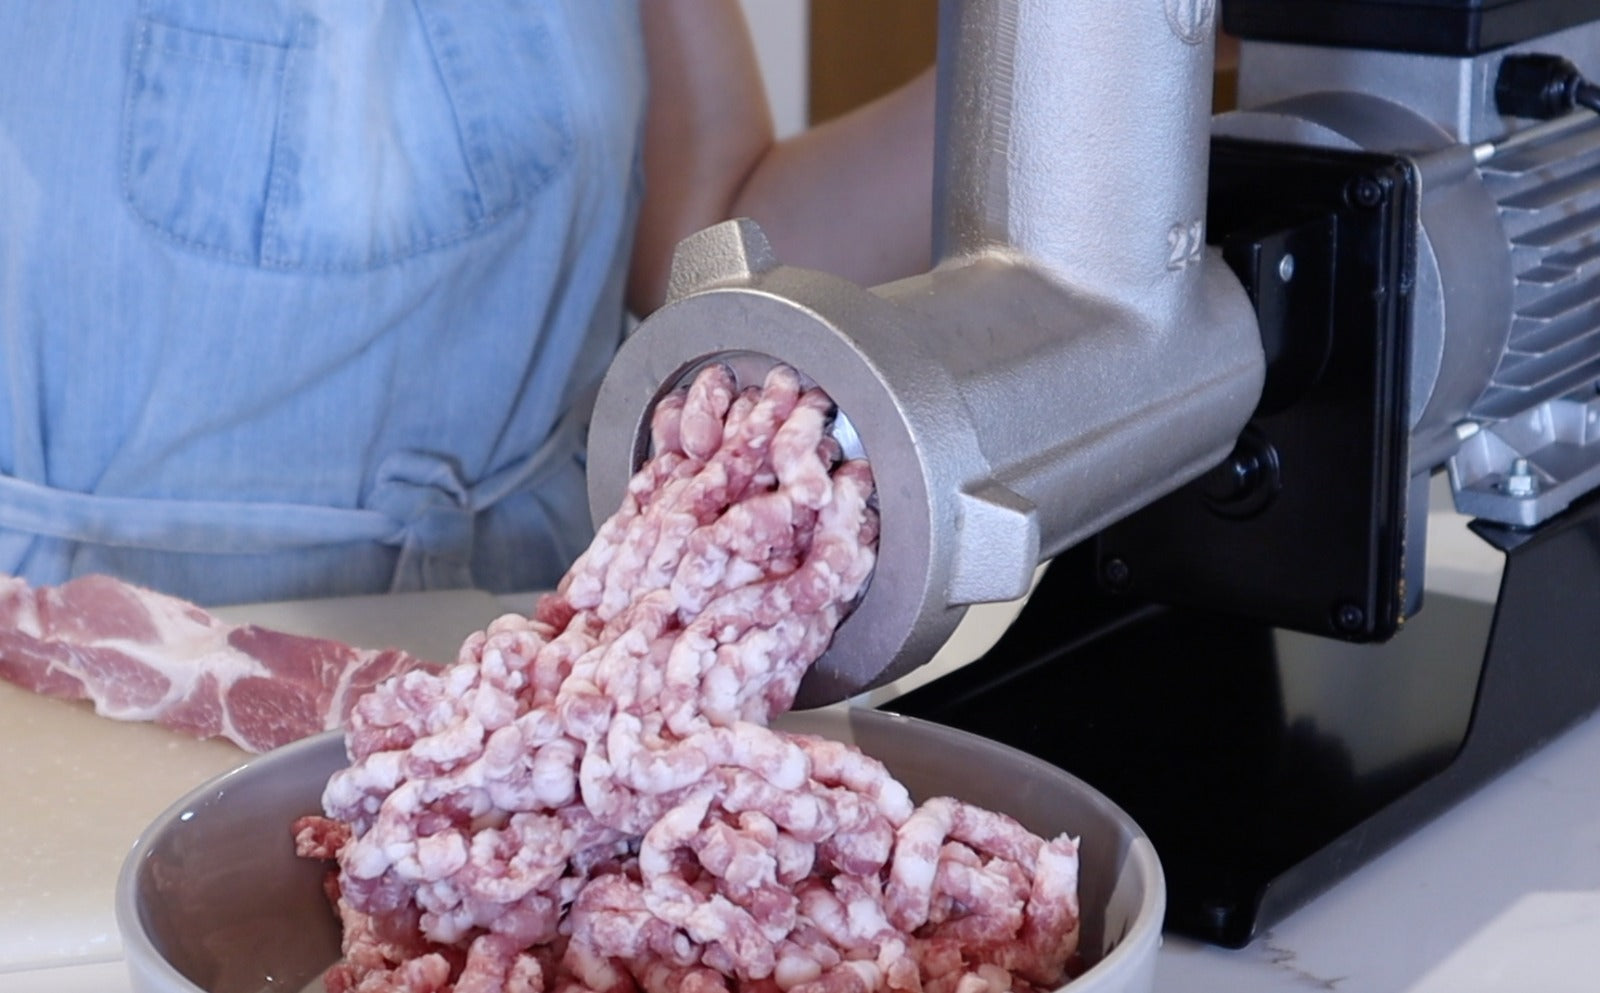 How to use the Fabio Leonardi Mr9 Meat Grinder for Meat Grinding, Sausage Making, Salsa, and More